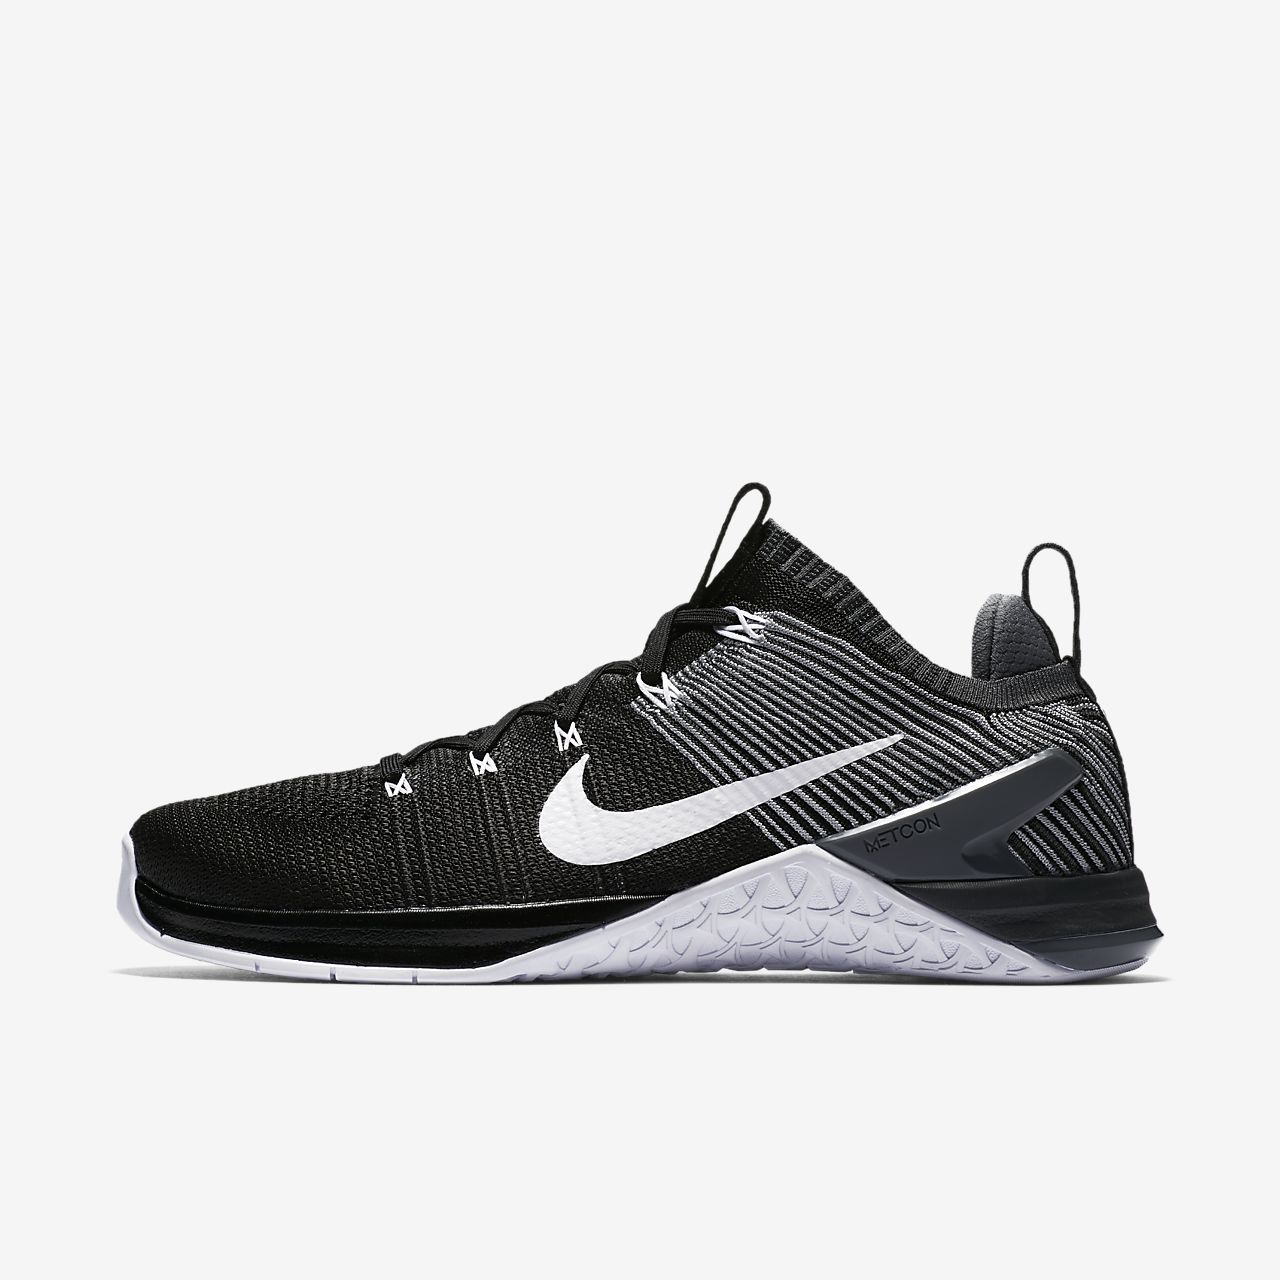 best nikes to workout in